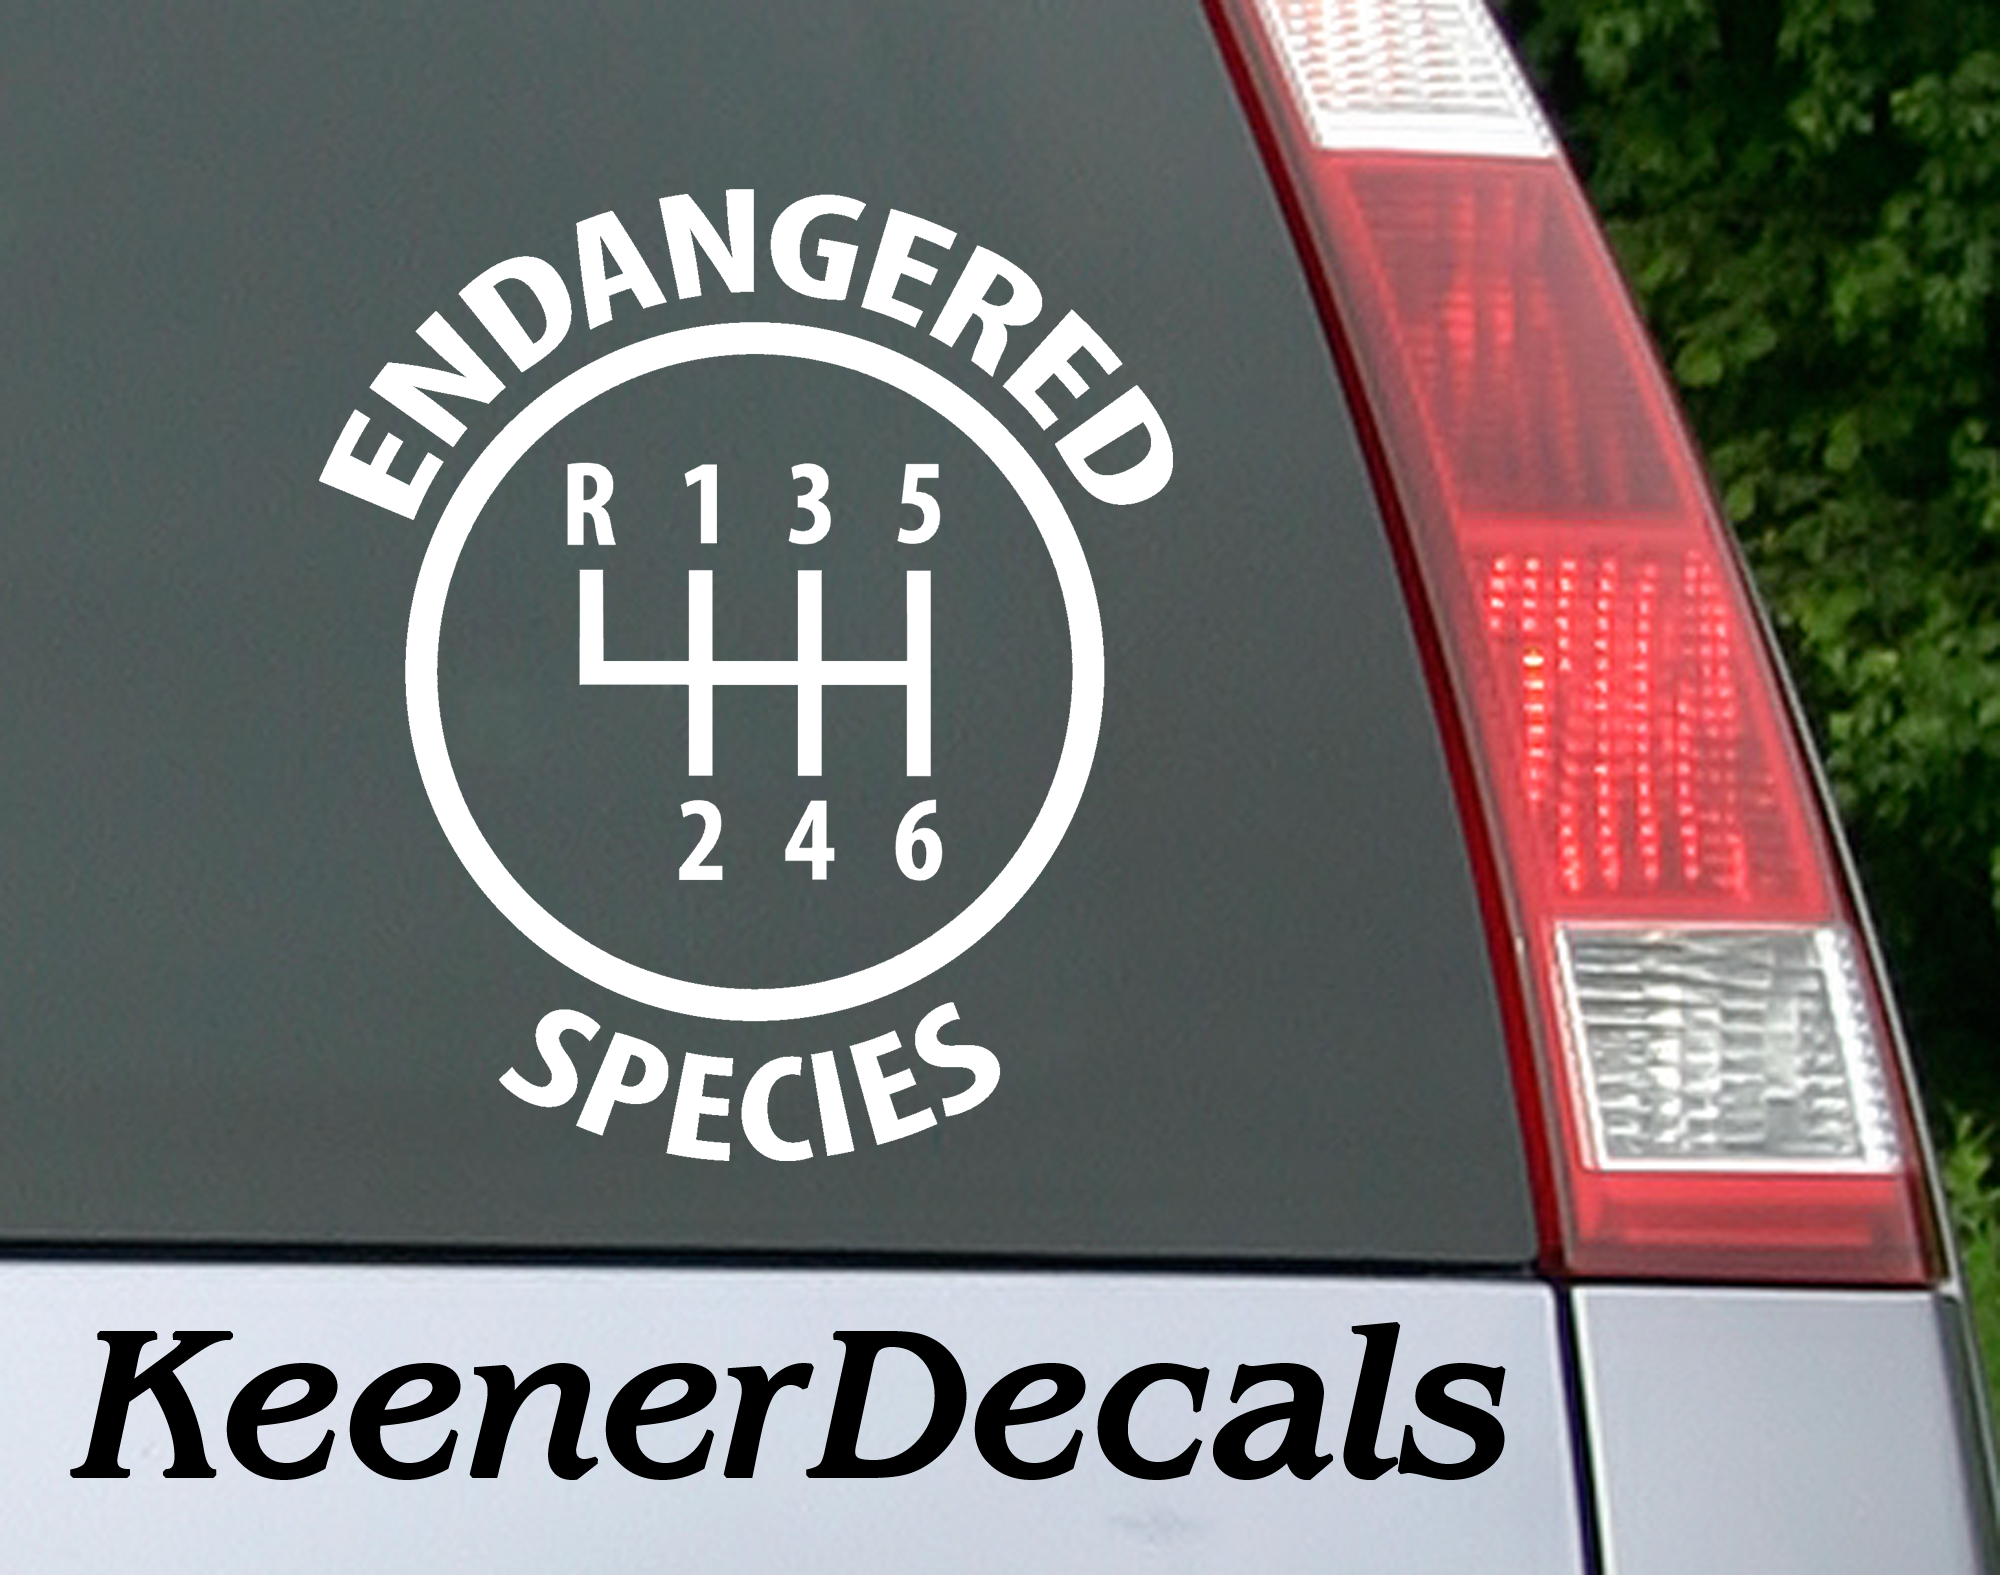 Endangered Species  Vinyl Car Decal Bumper Sticker is a must have to add to your back window. Manual transmissions / Stick Shift, truly is an endangered species.  3.52"W x 4"H Car Decal, Car Sticker, Car Vinyl, Bumper Sticker, Vinyl Stickers, Vinyl Sticker.  FREE SHIPPING FOR ALL VINYL DECALS within Canada and the US.